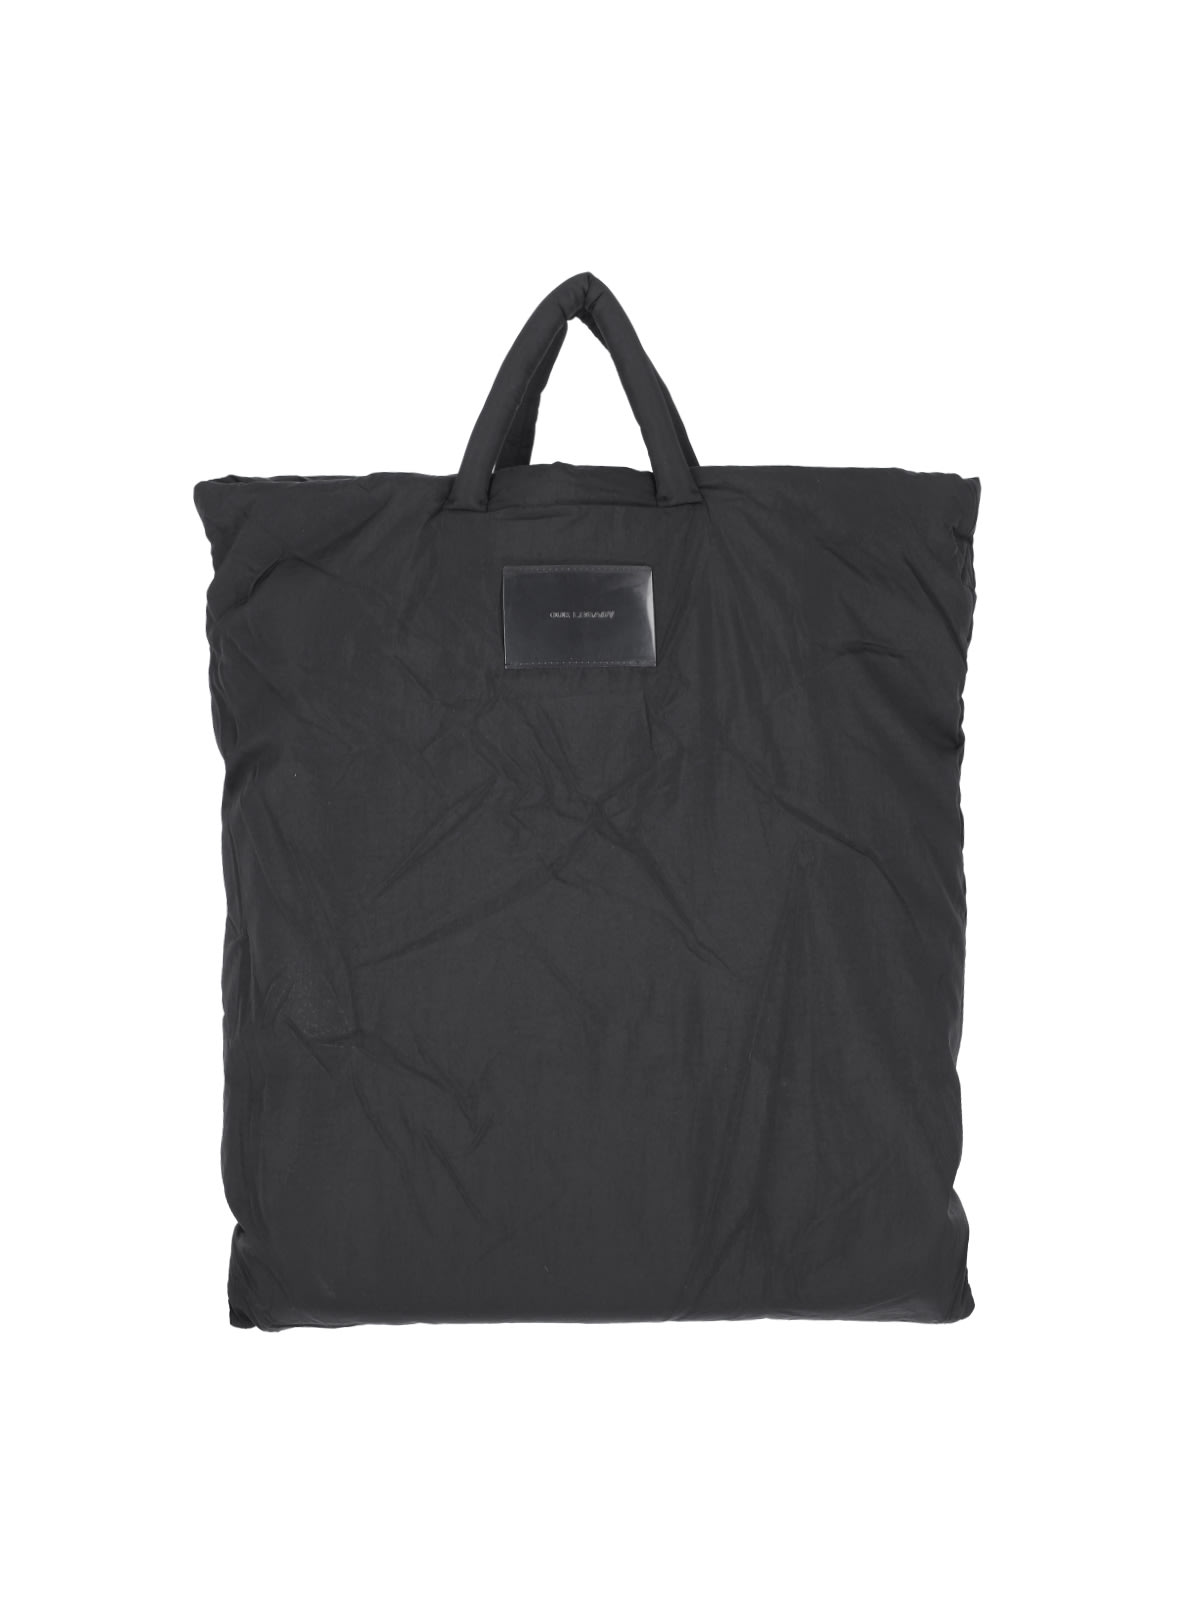 Our Legacy Tote